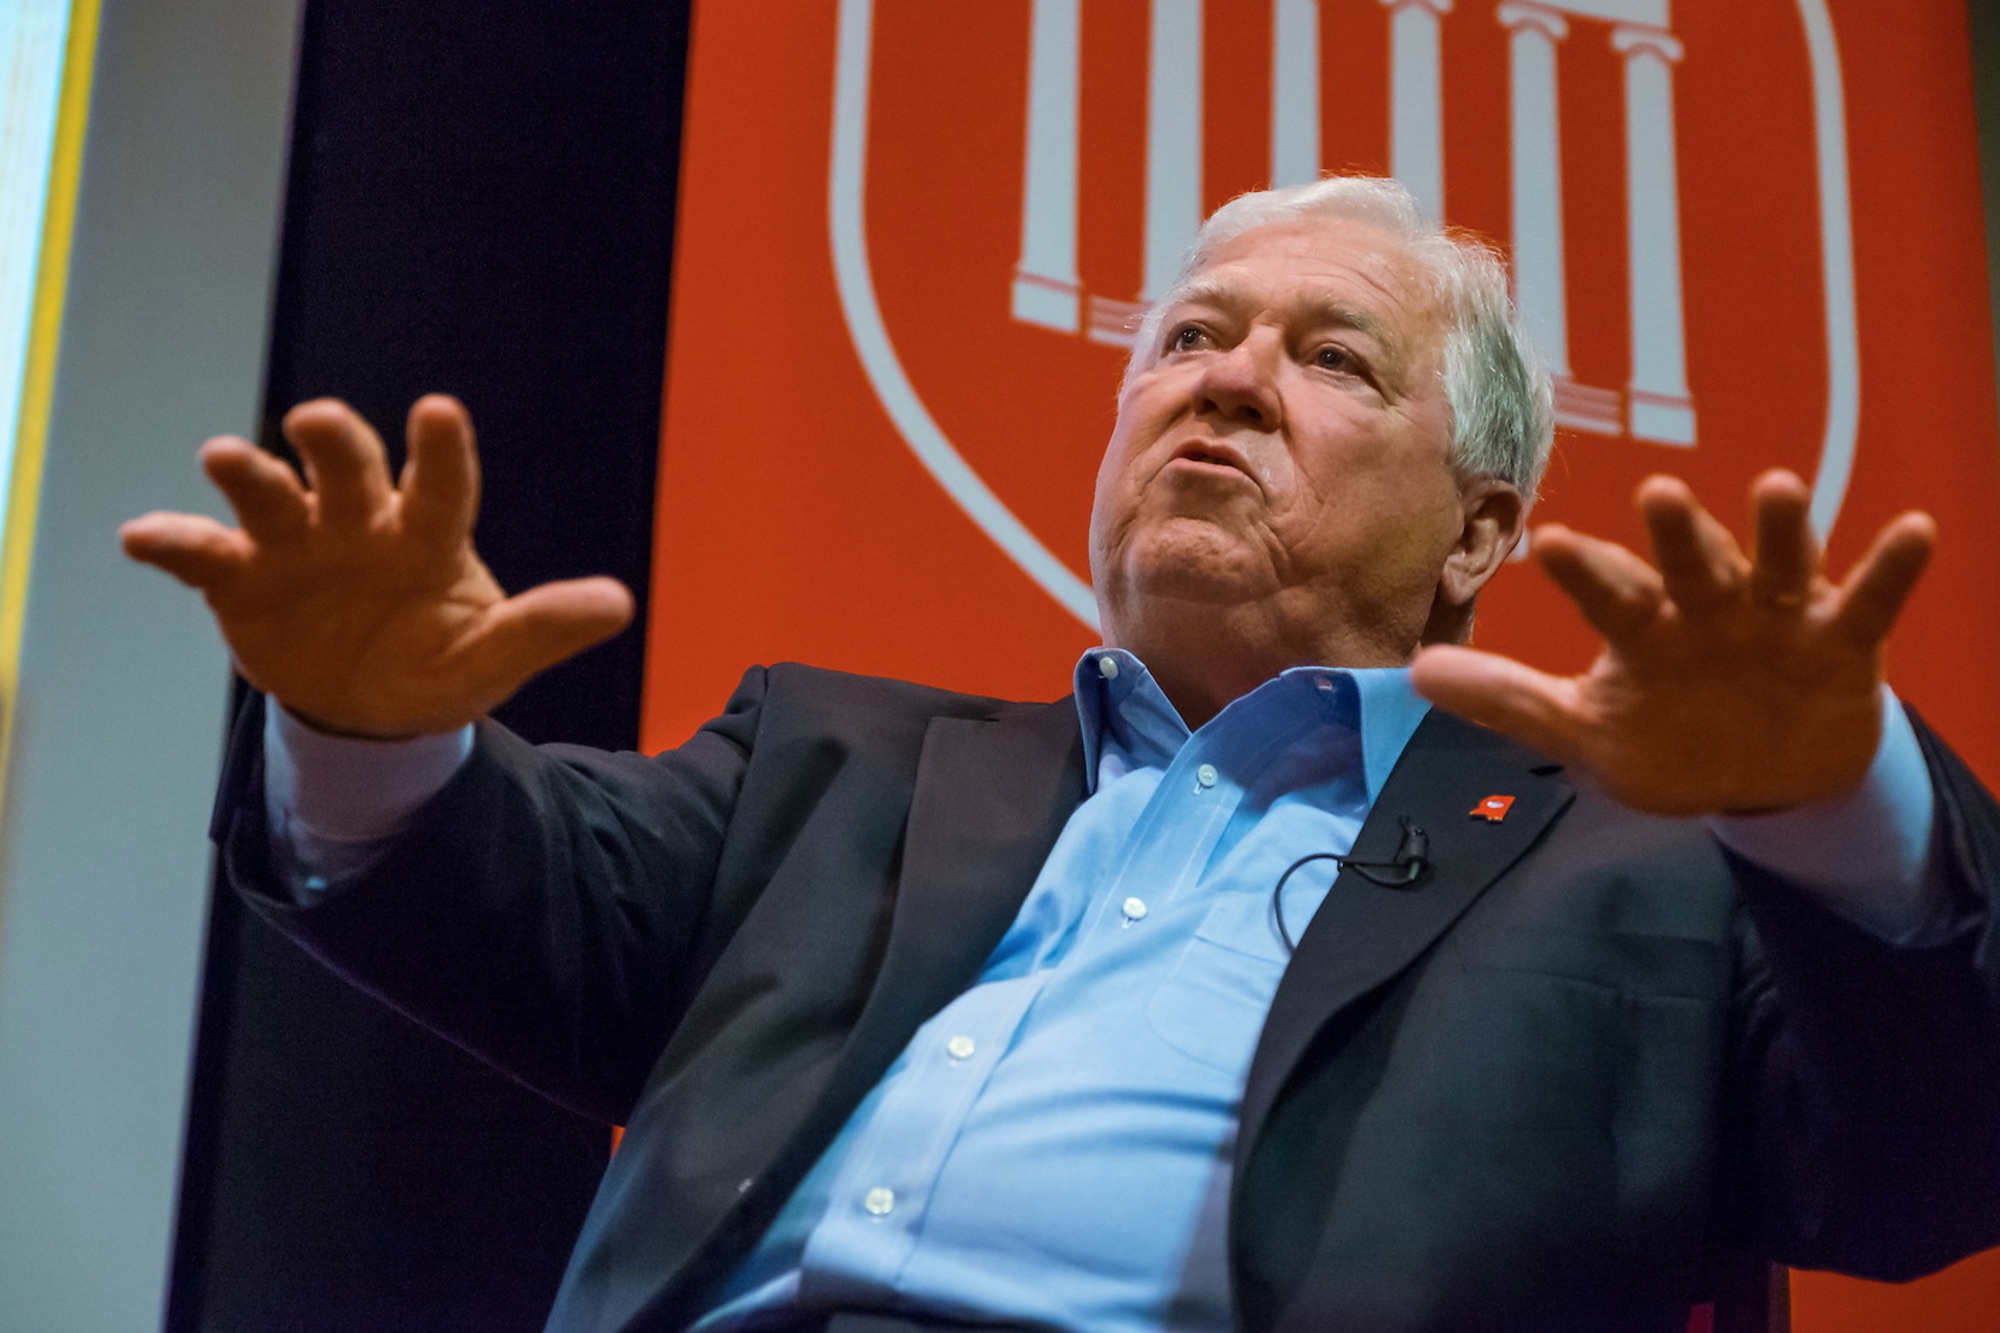 Photo of Haley Barbour at Overby Center